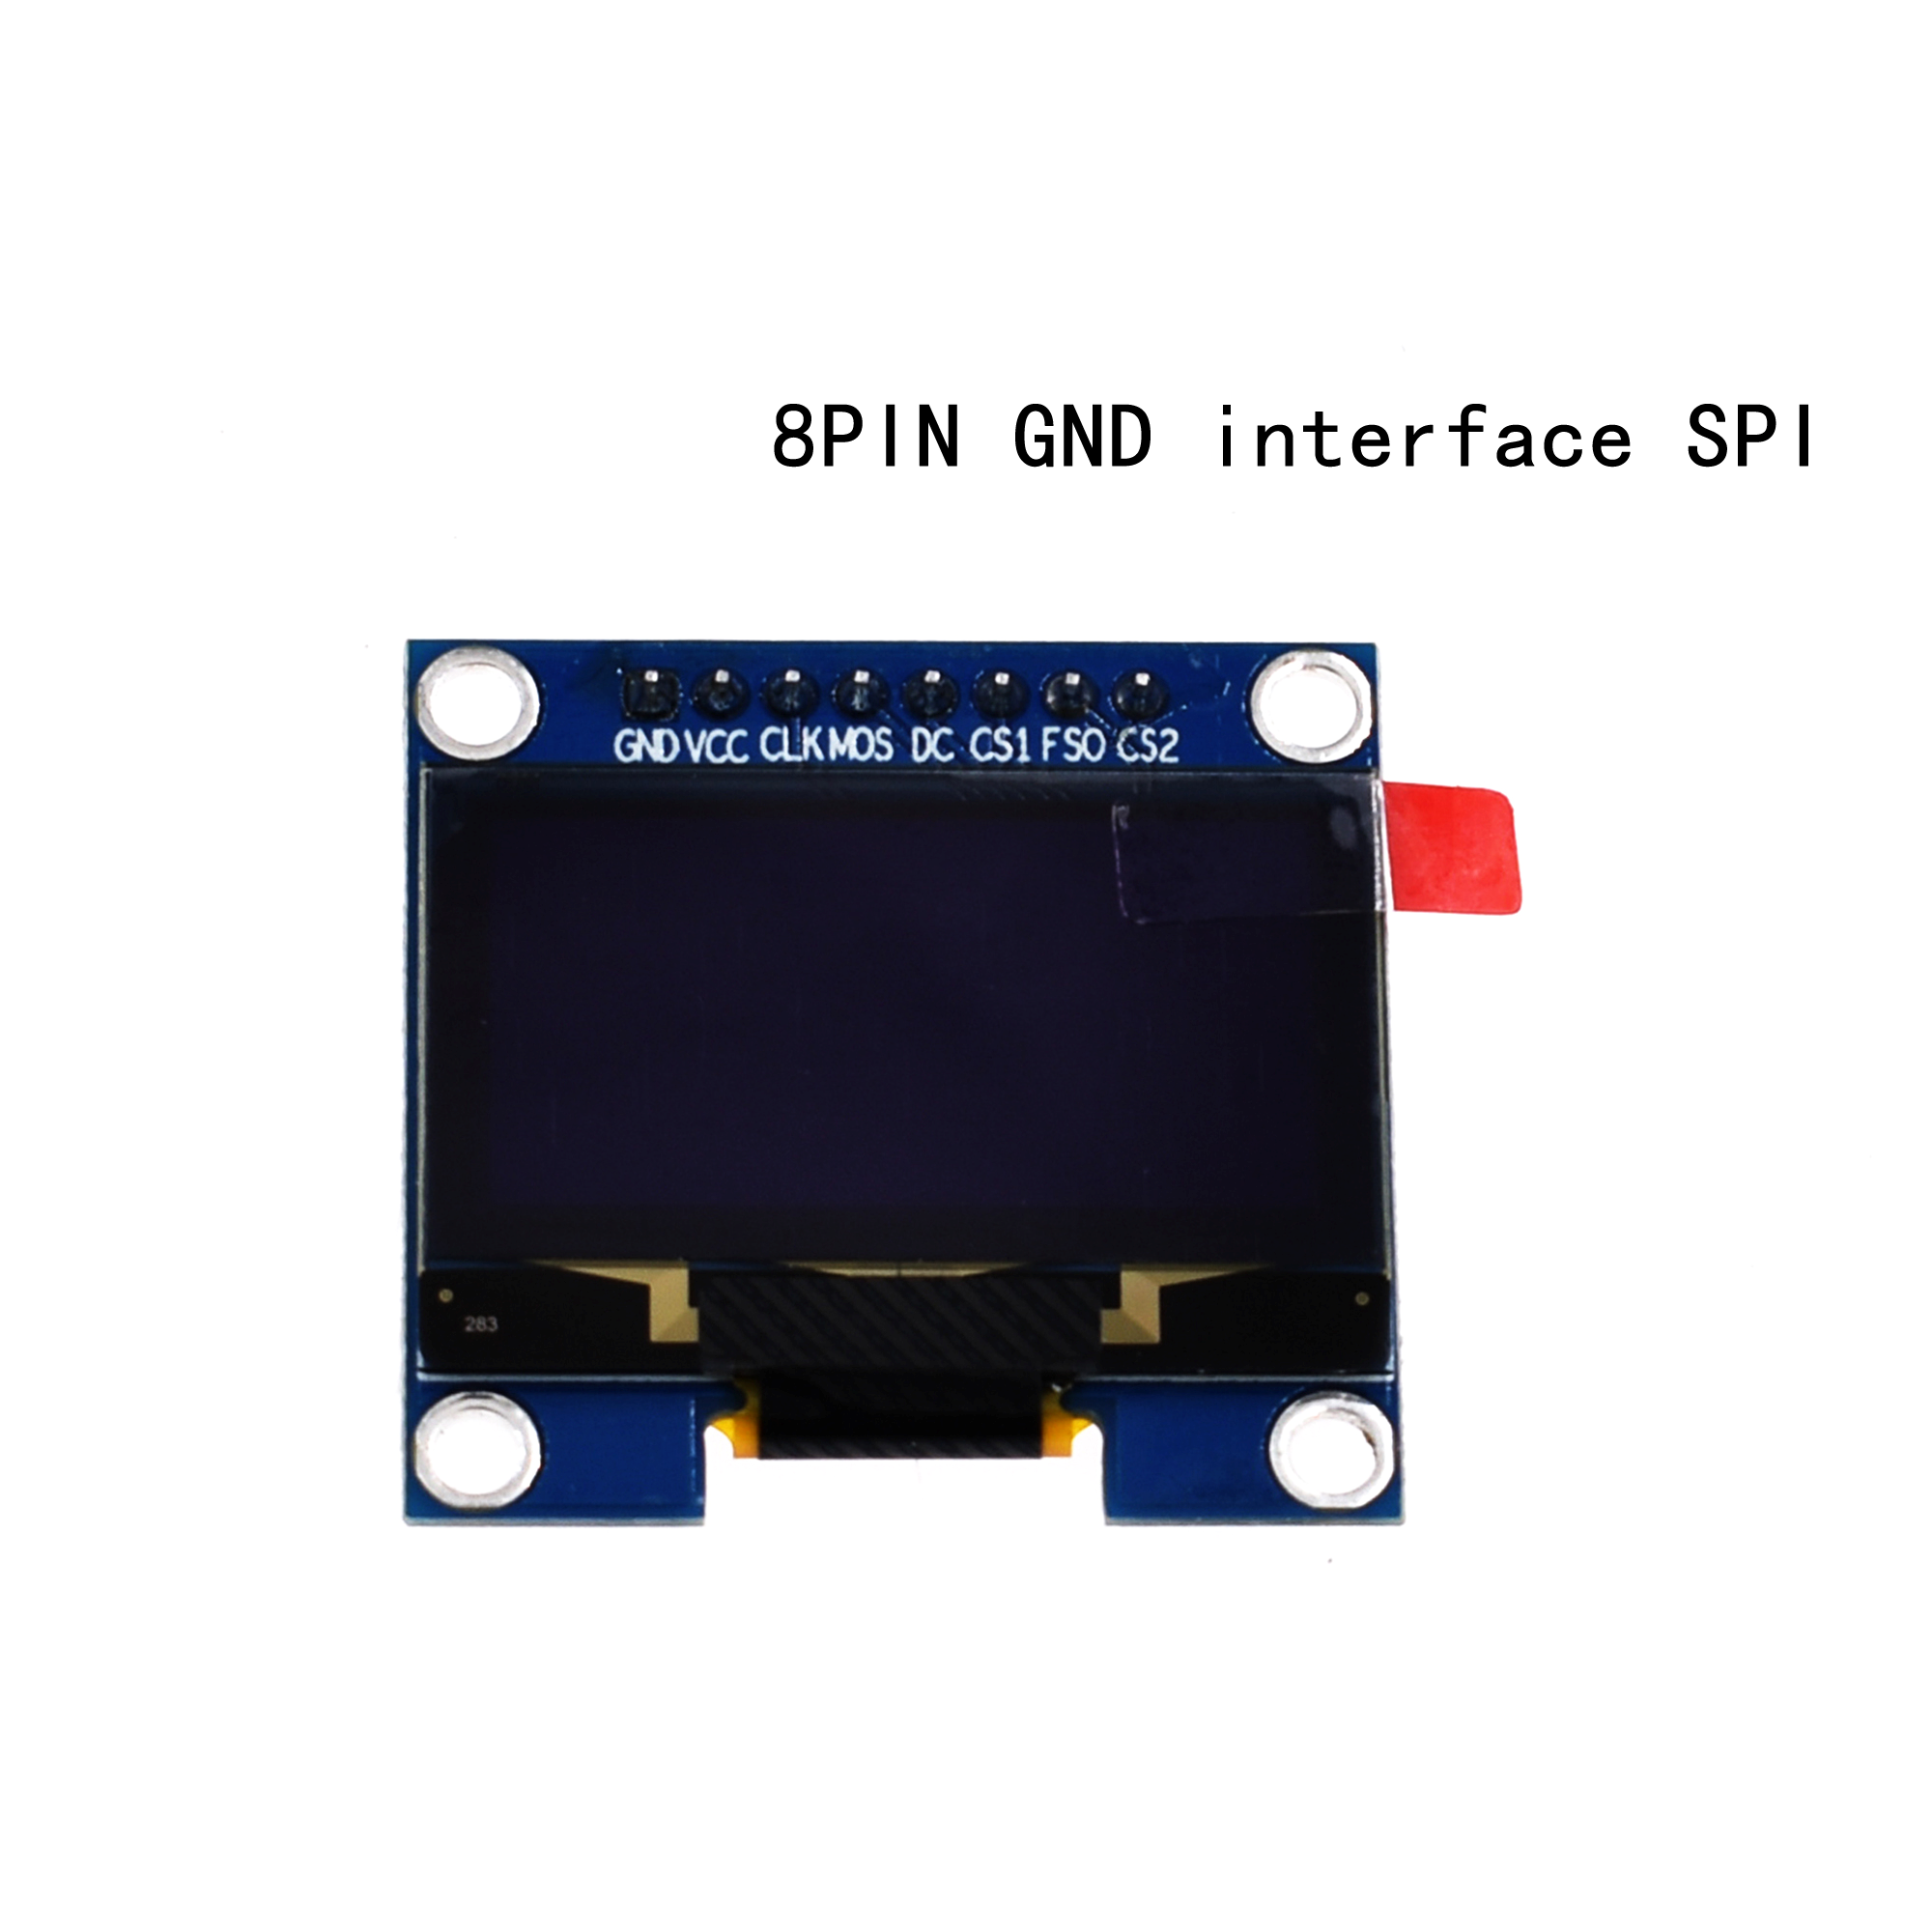 0.95"/0.9"/1.3"OLED LED Display Module 4-8PIN GND/VVC Interface IIC I2C/SPI new 